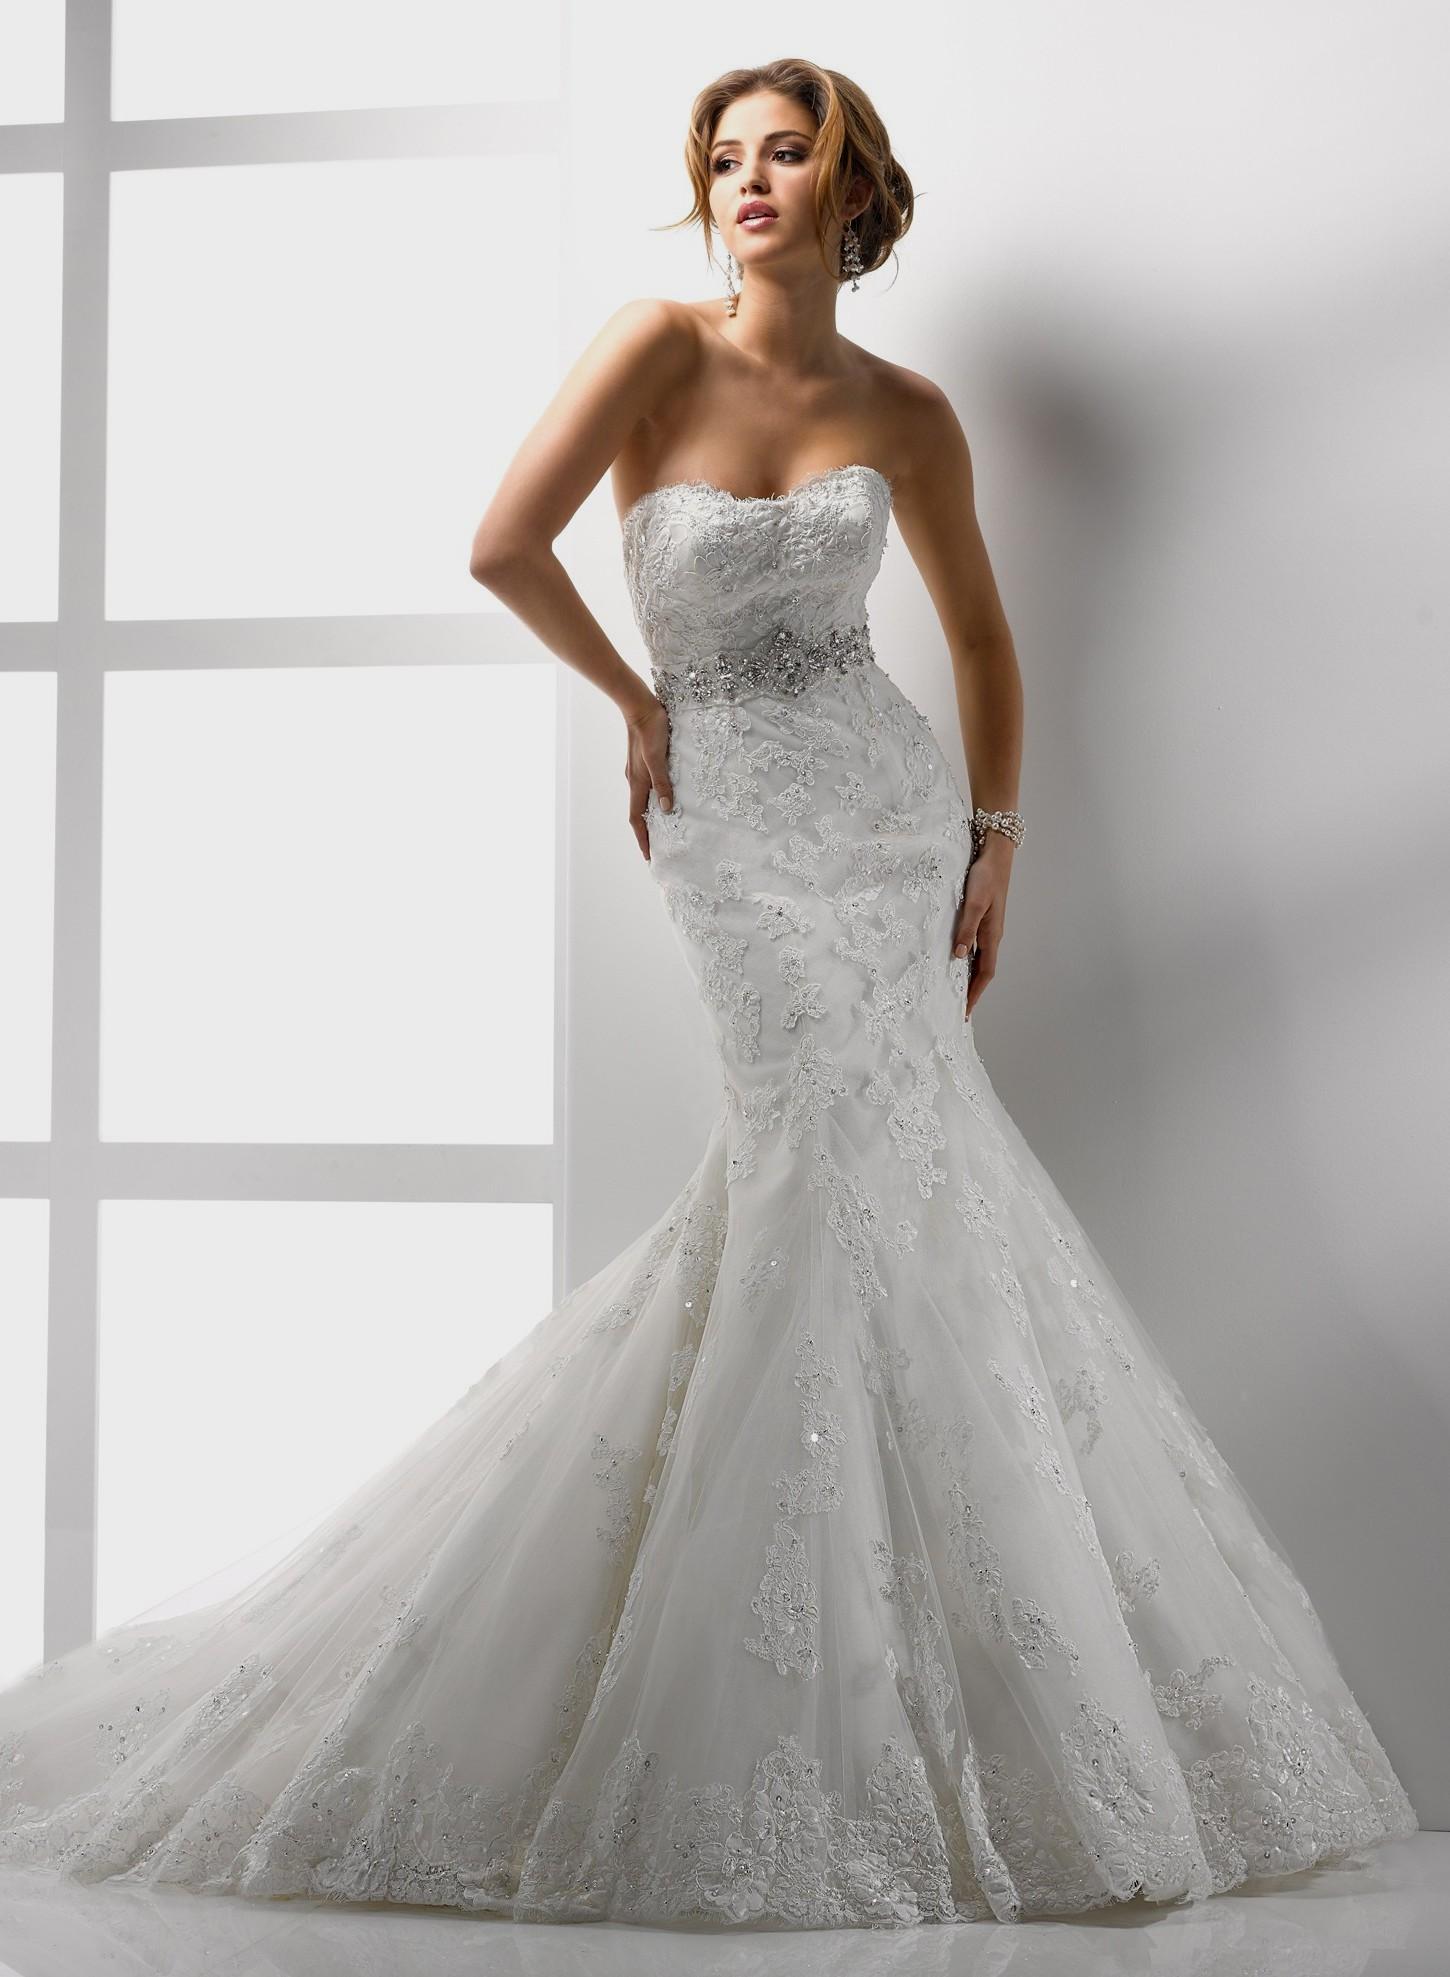 Wedding Dress For Your Body Type | Wedding Gown Styles For Your Body